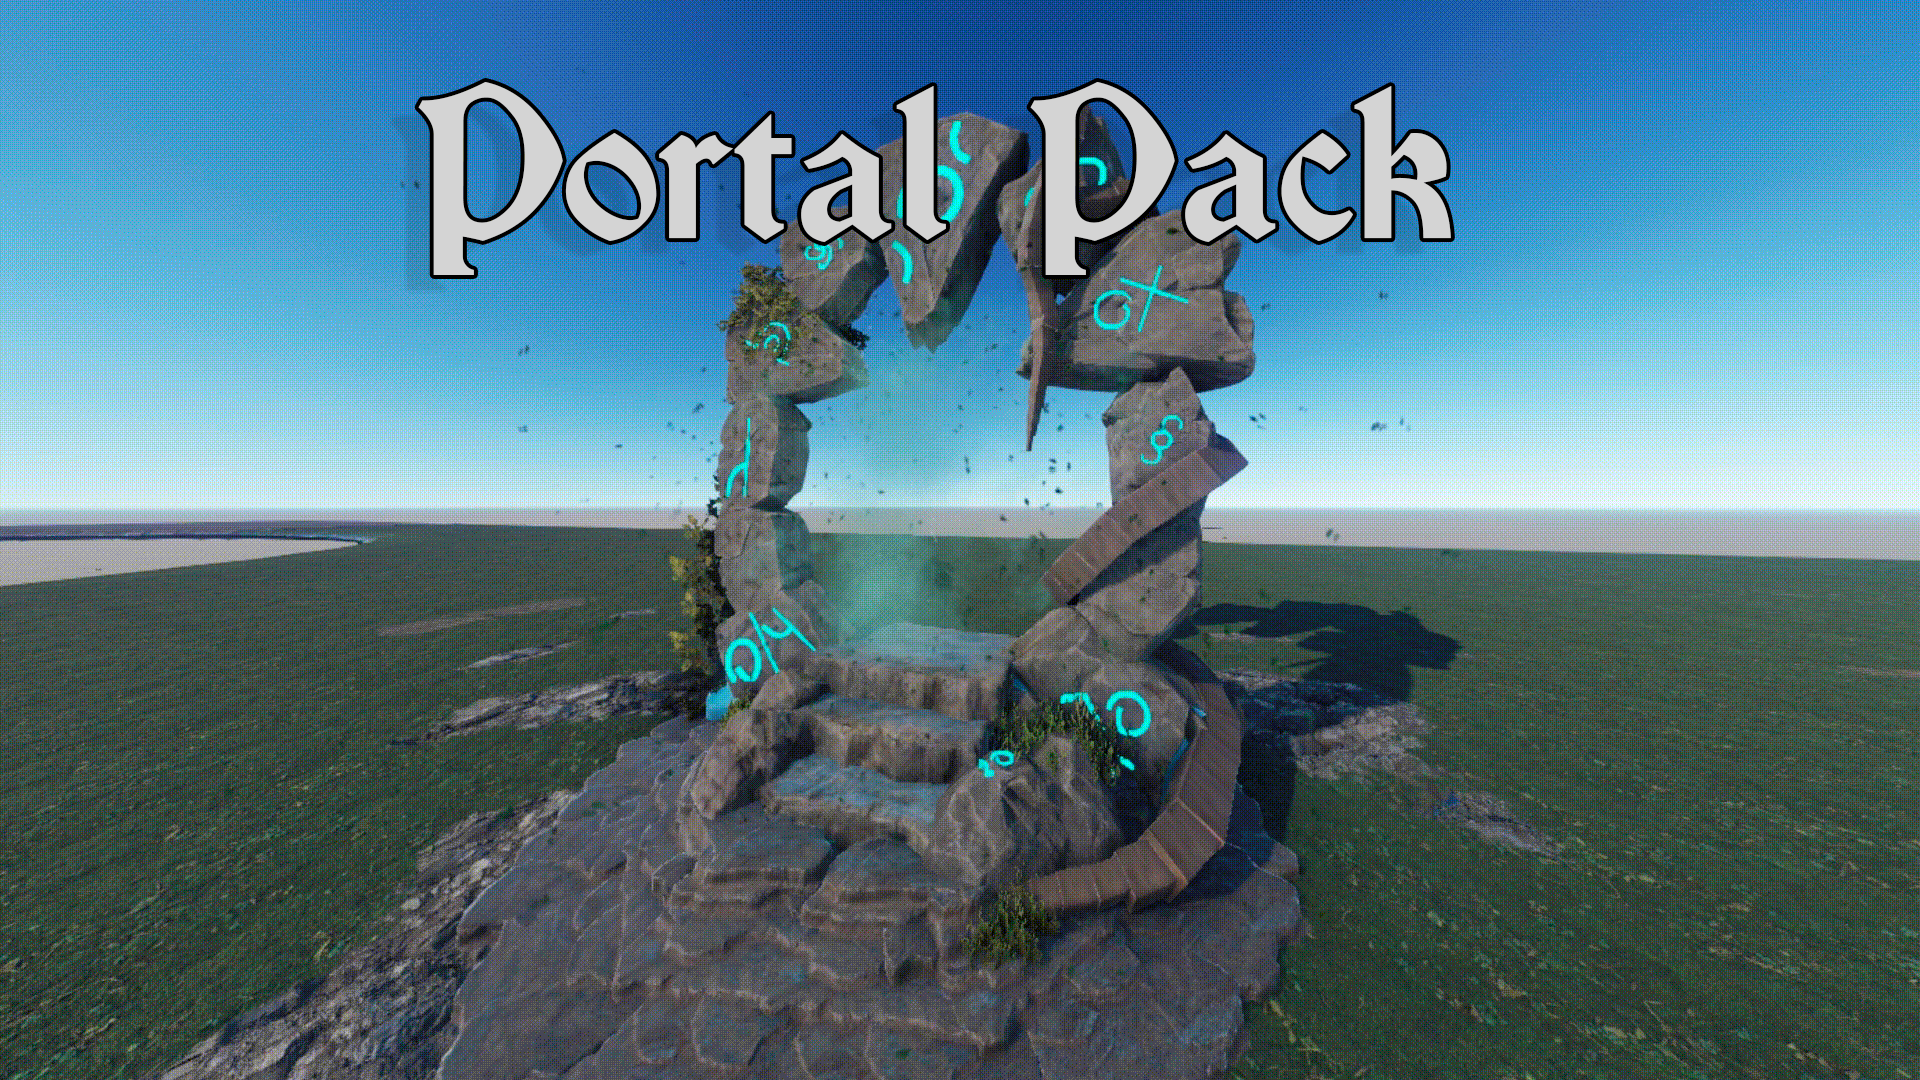 More information about "Portal Pack [HDRP]"